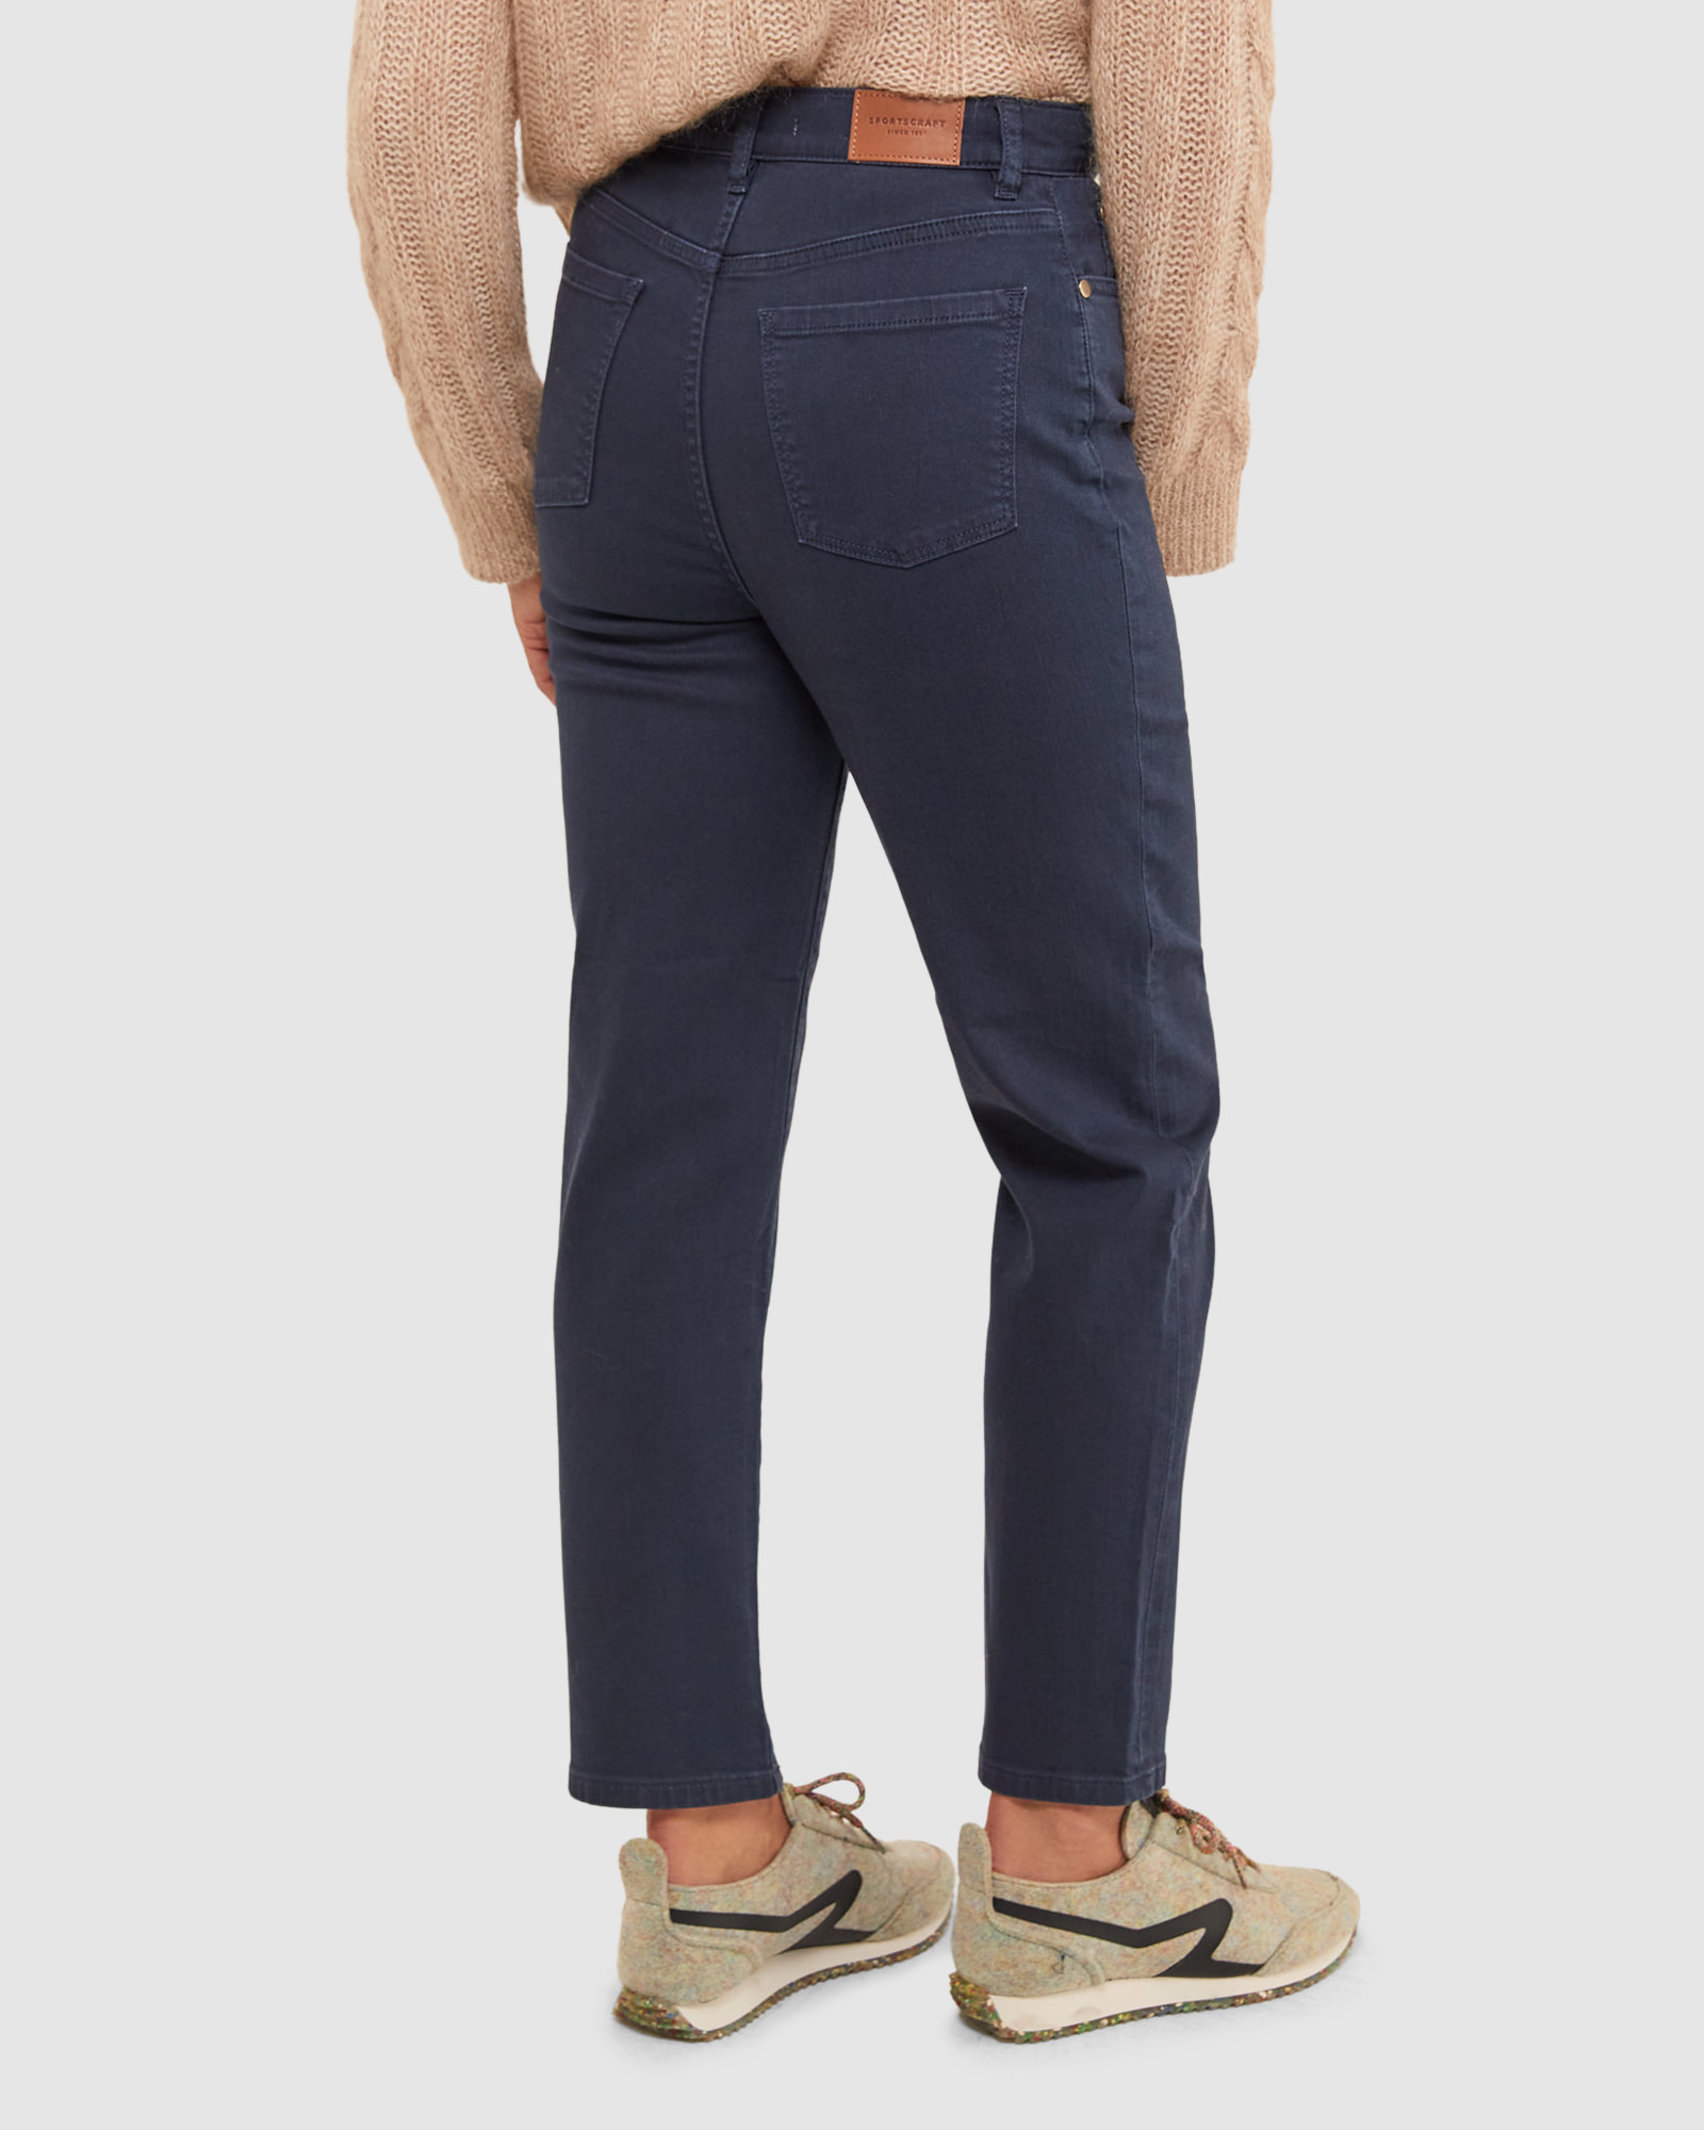 Mika Pant in NAVY